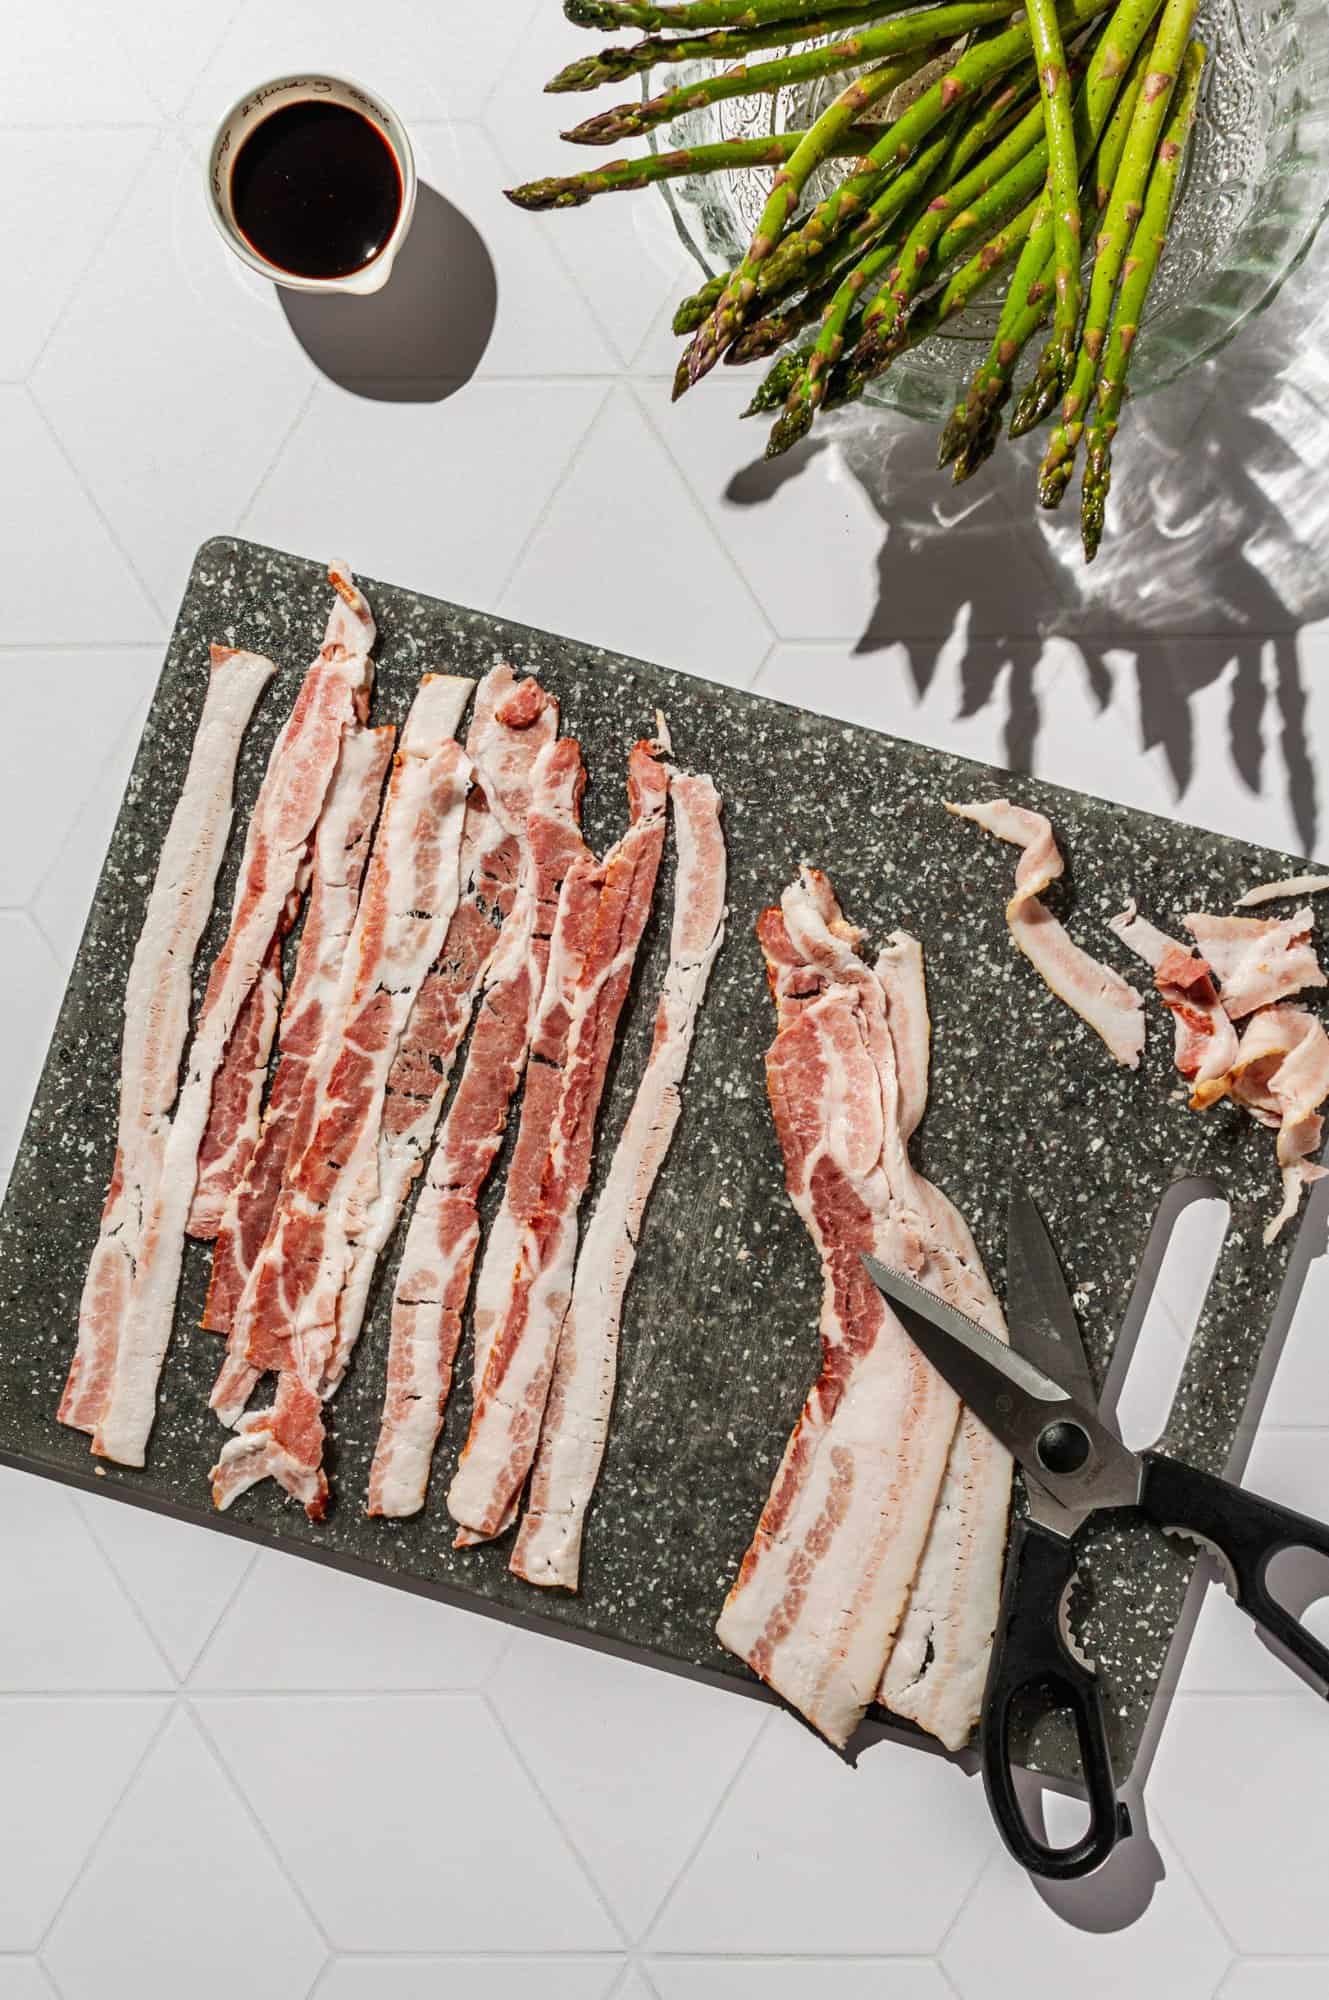 cutting bacon into long thin strips with kitchen shears on a cutting board